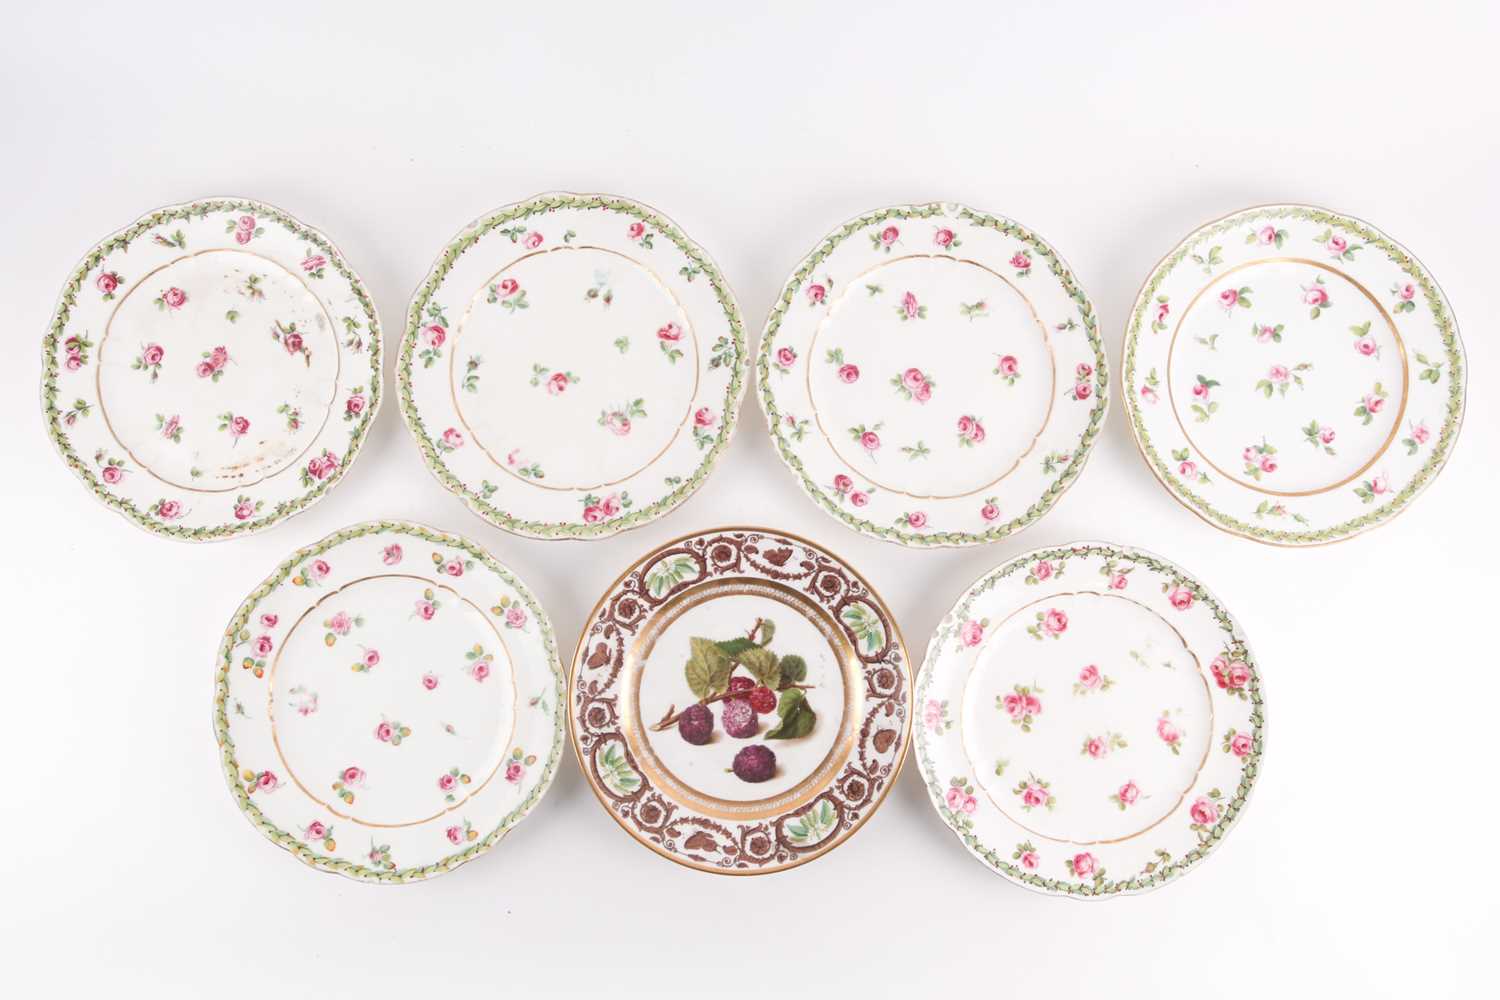 A set of six 18th century Sevres porcelain cabinet plates, with hand-painted rose decoration, within